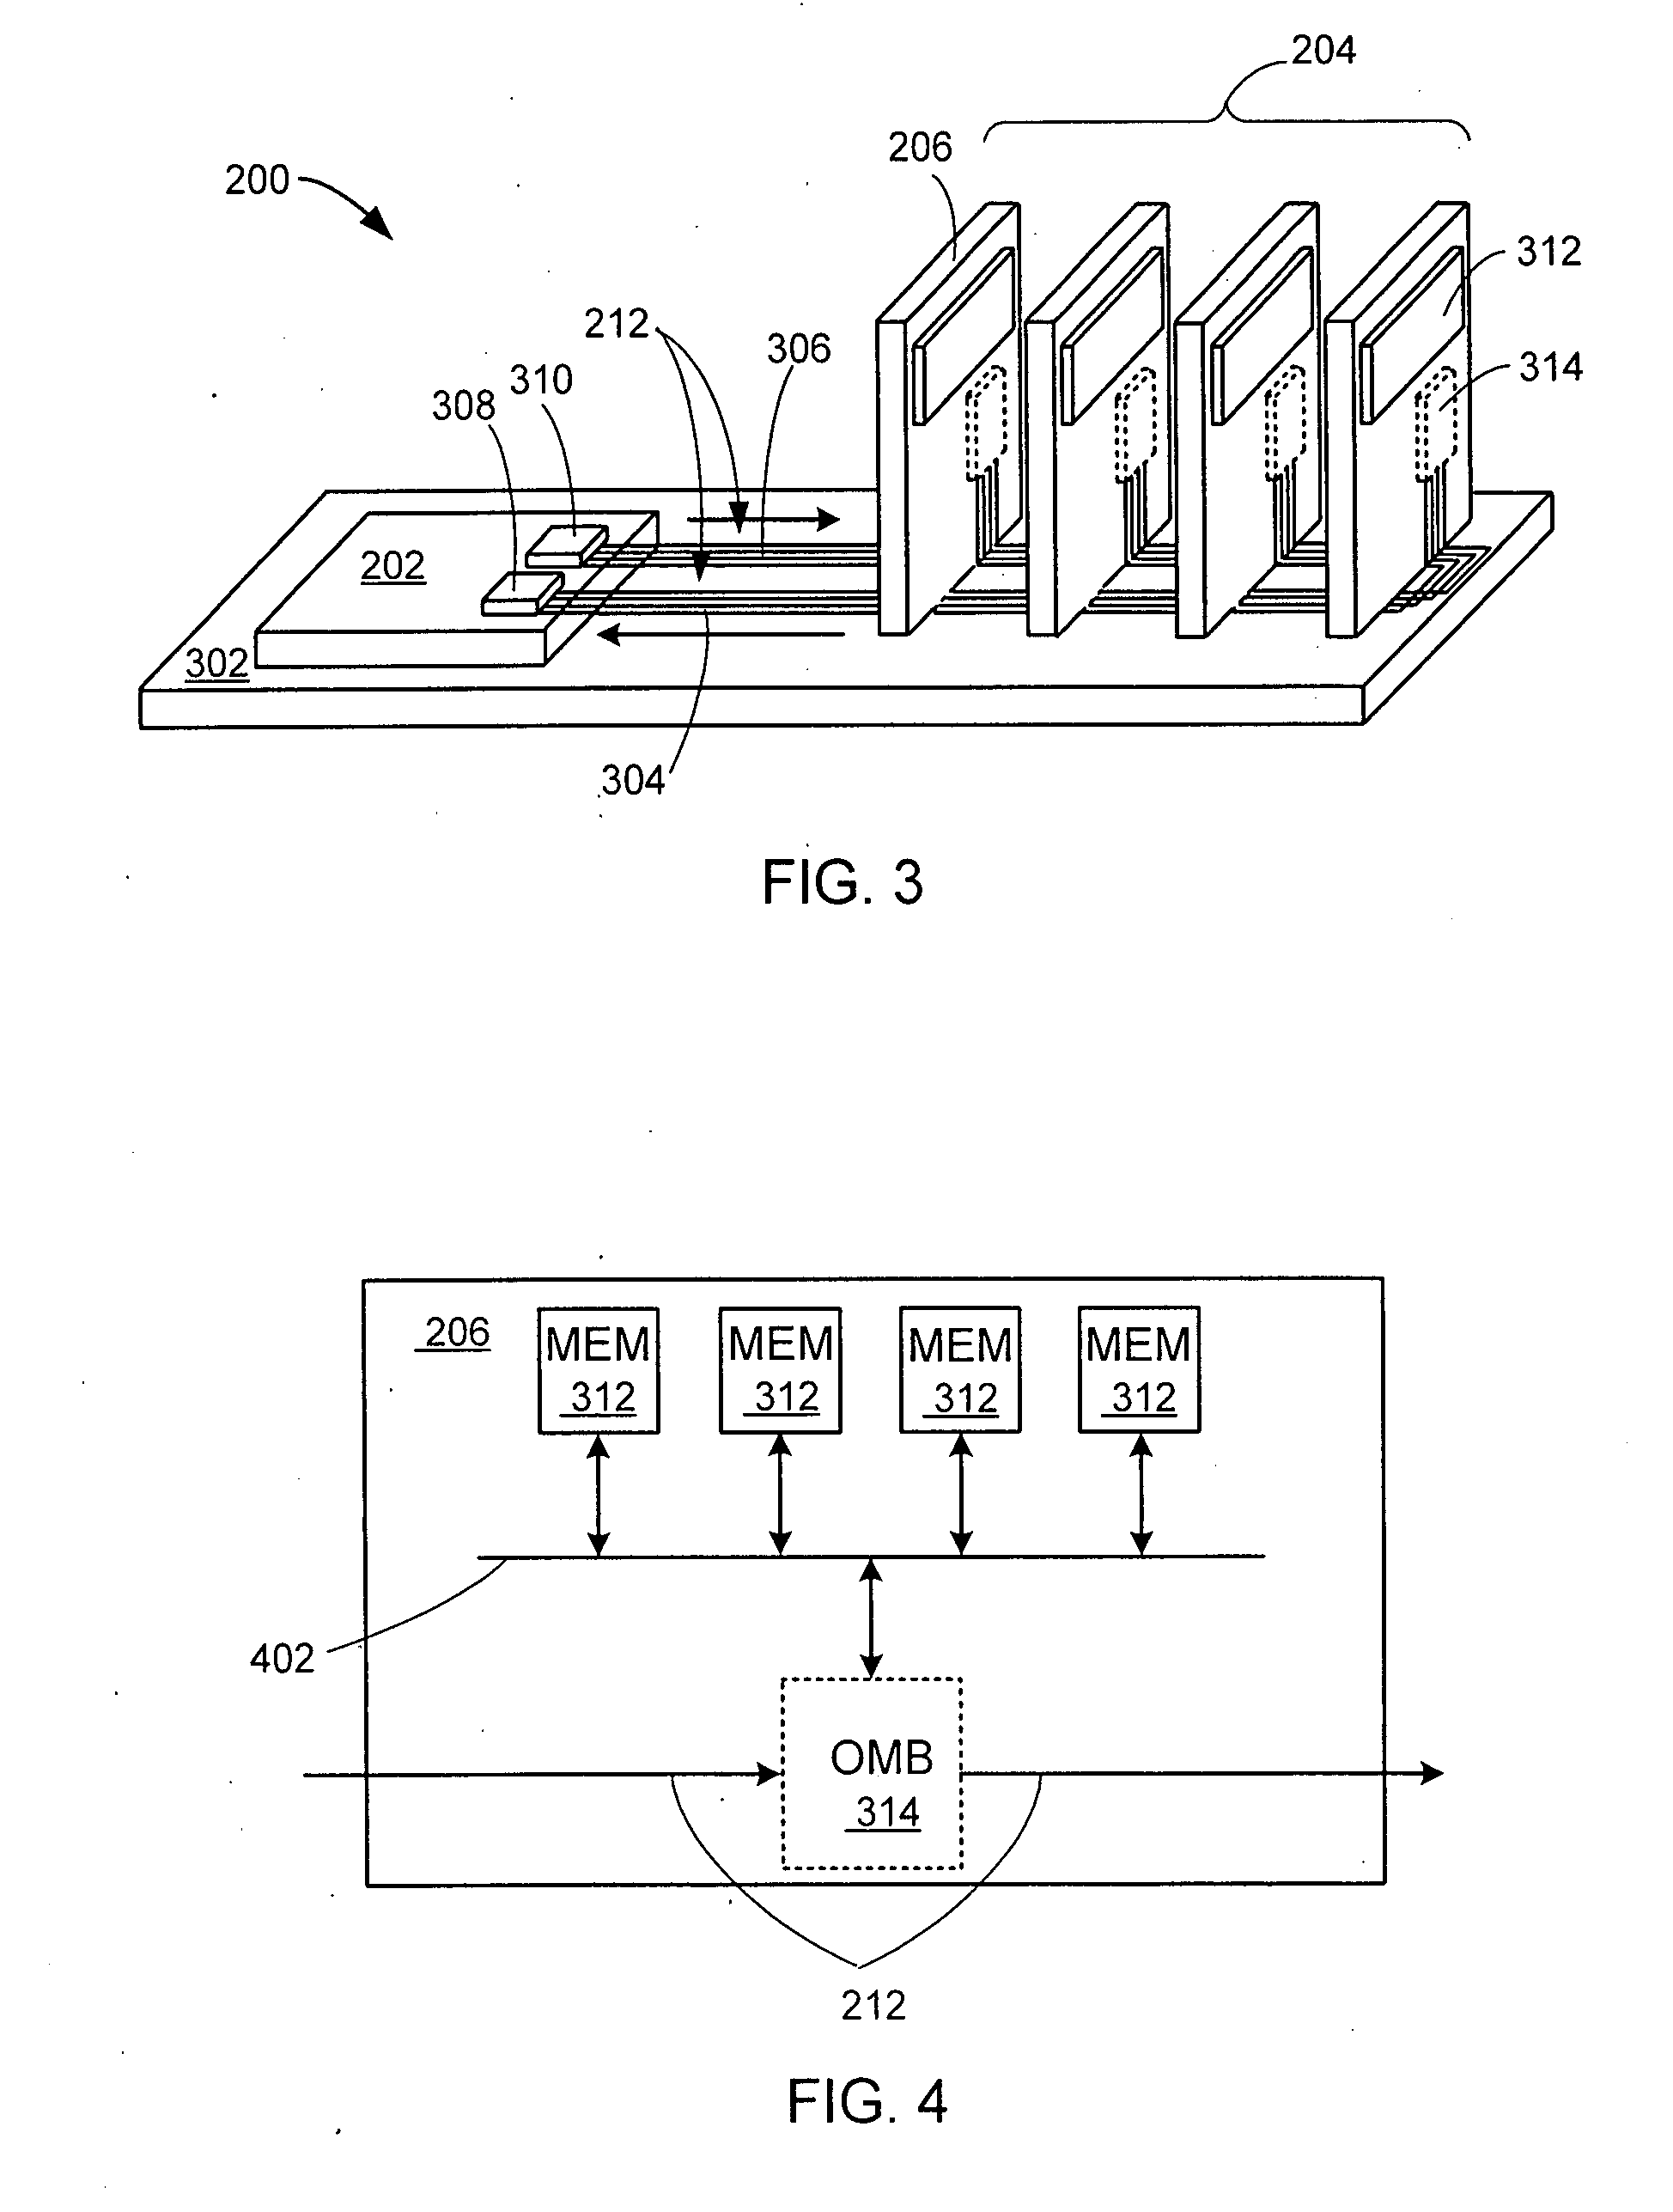 Synchronous optical bus providing communication between computer system components